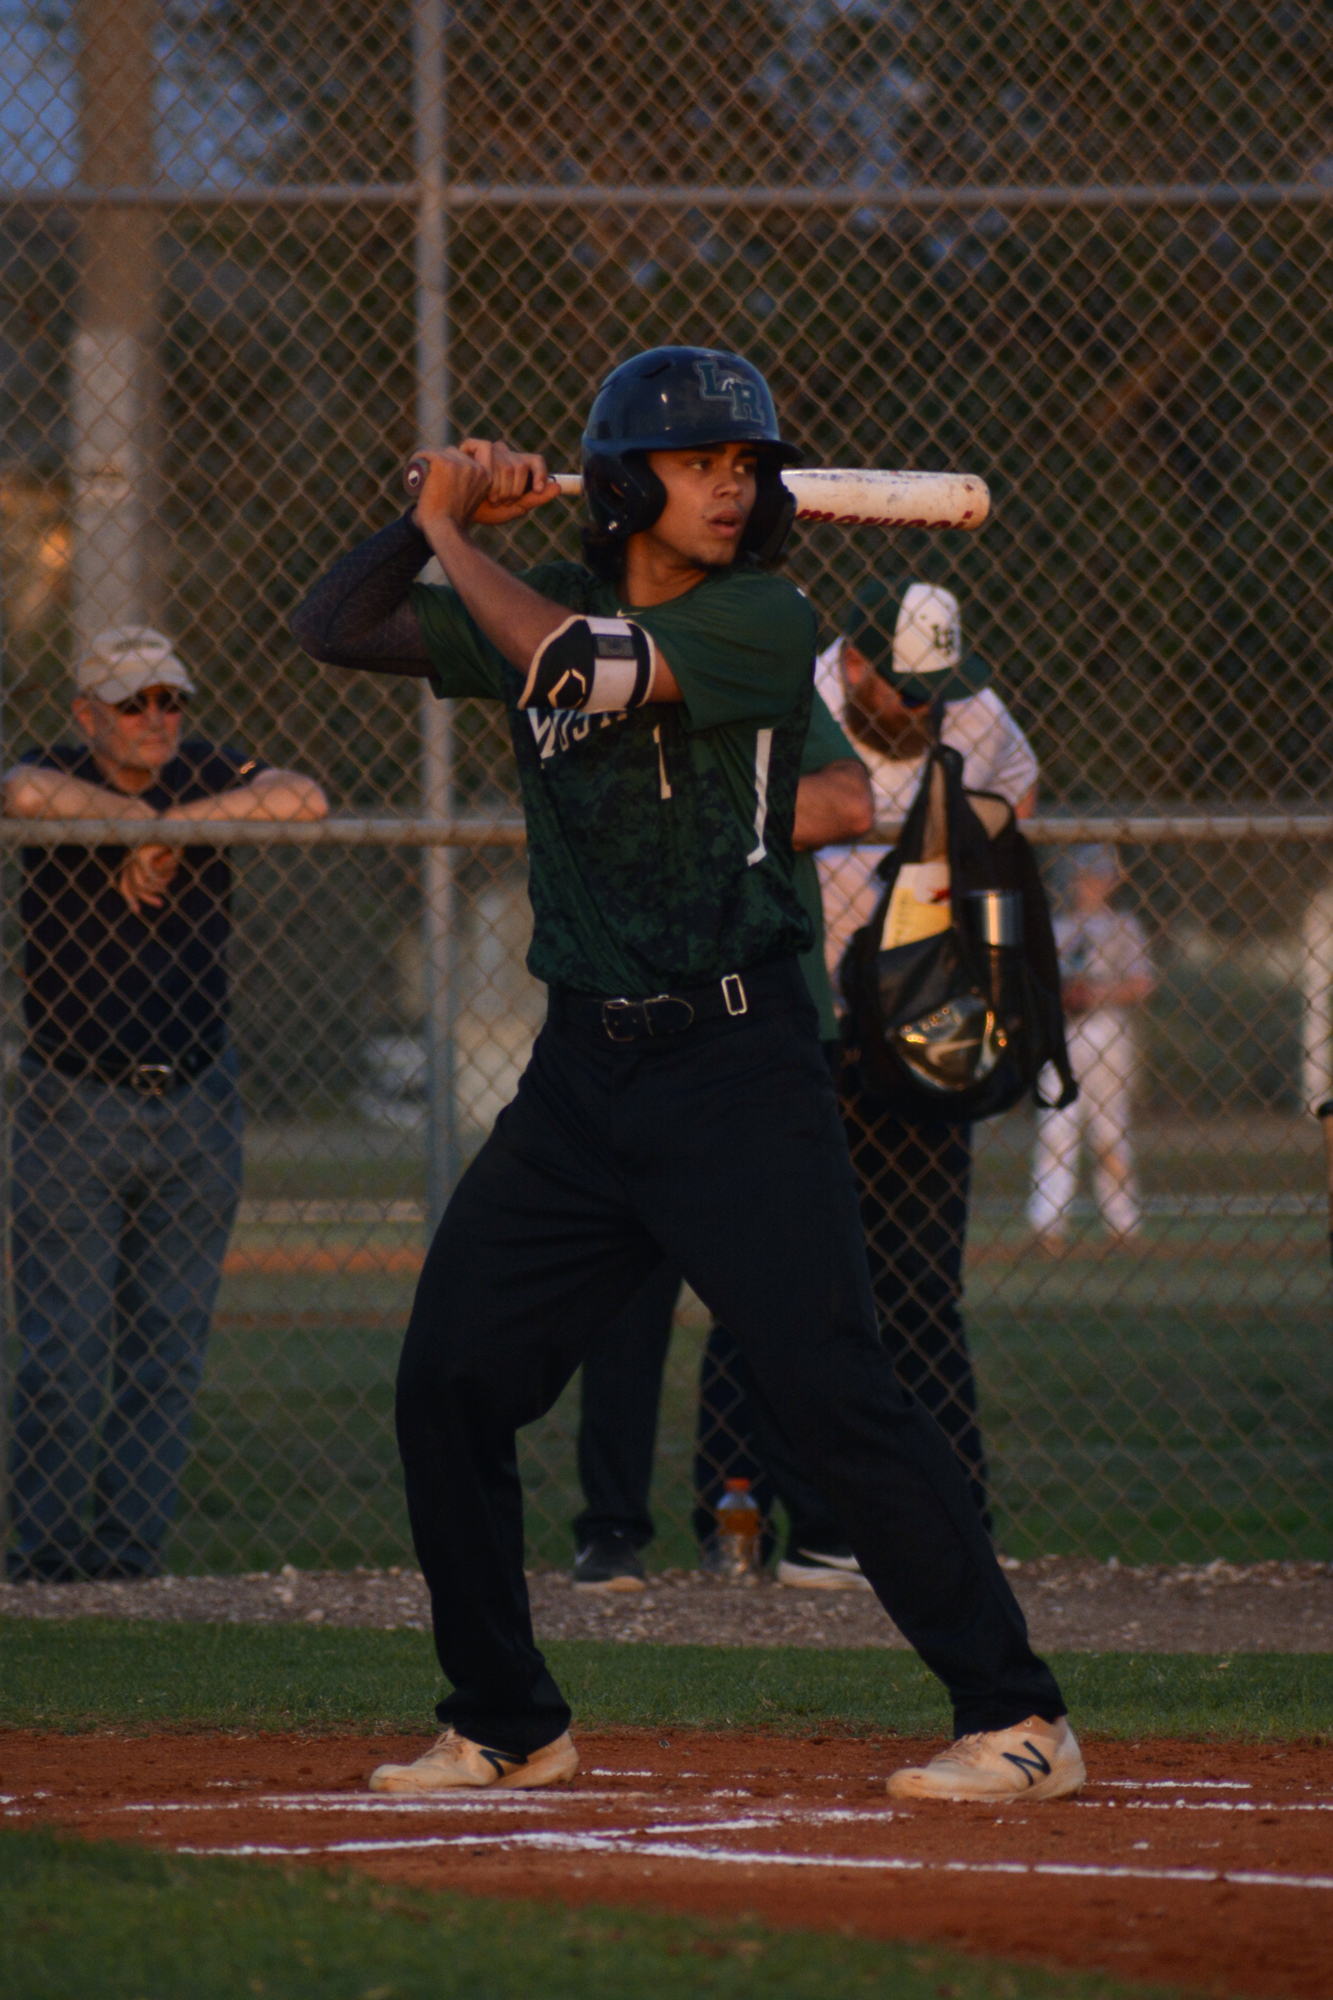 Richie Morales, a junior, plays shortstop and hits leadoff for Lakewood Ranch.